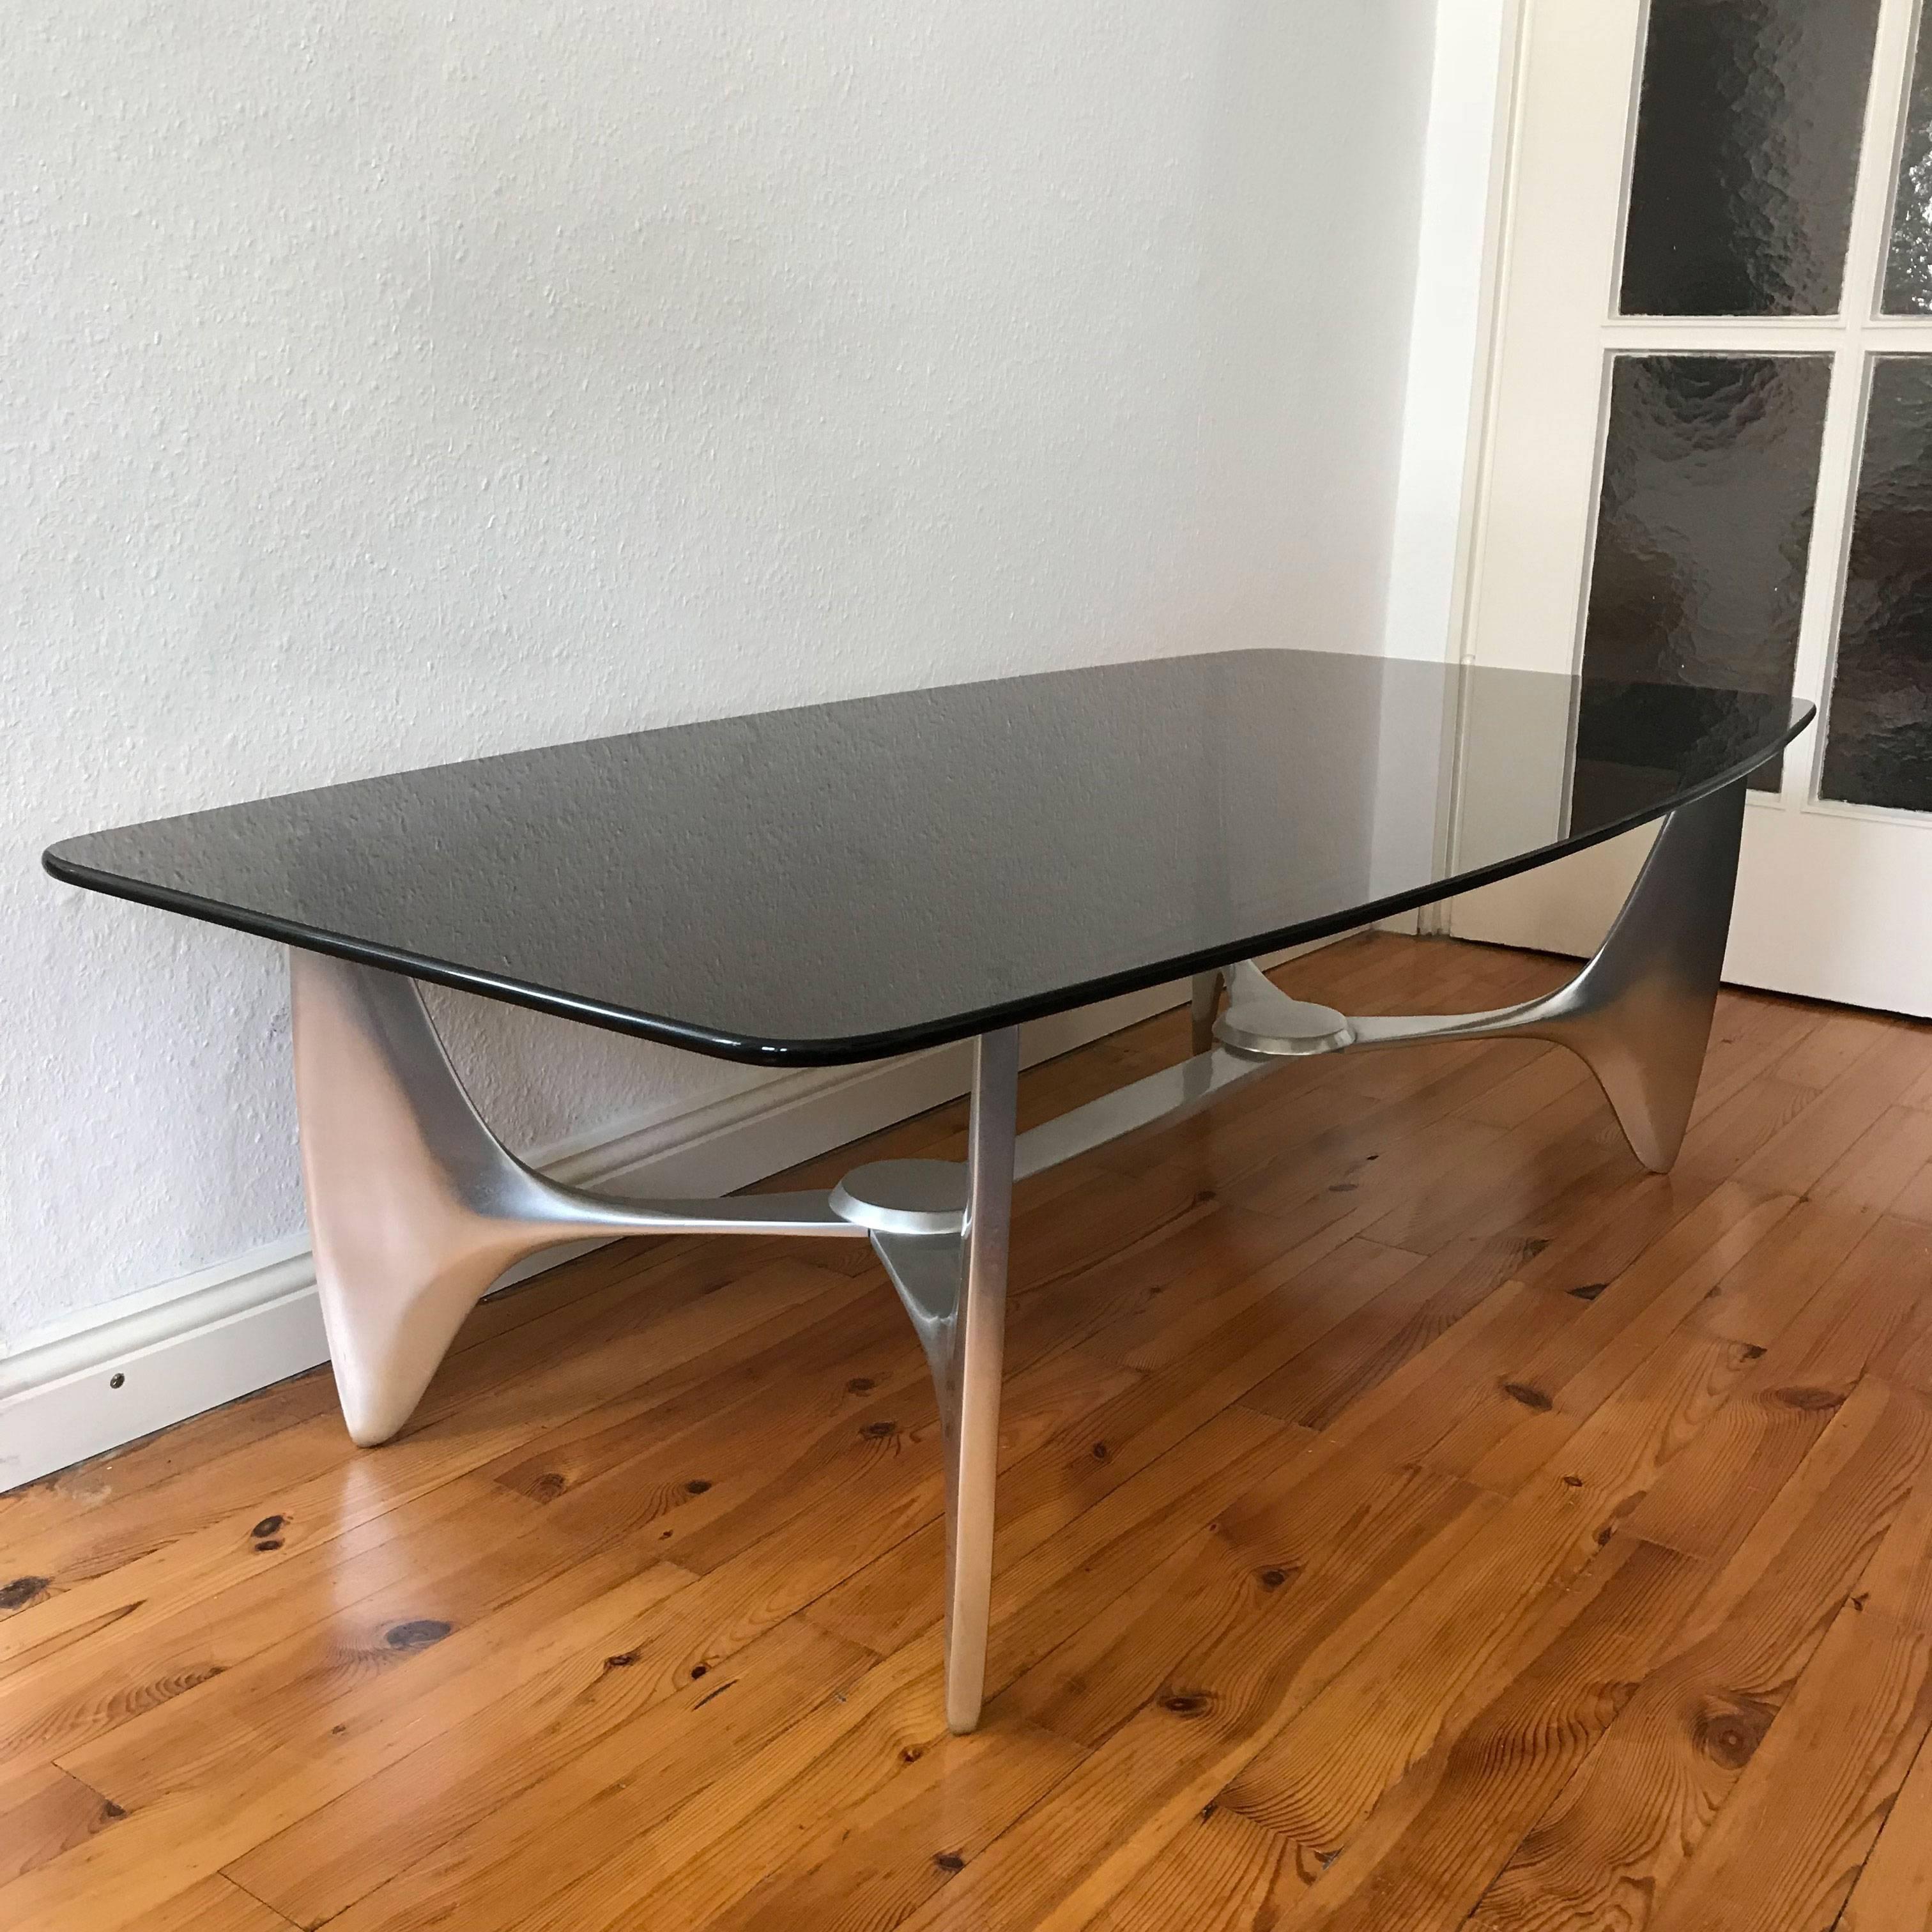 Sculptural Mid-Century Modern coffee or occasional table by Knut Hesterberg for Ronald Schmitt, 1970s, Germany.

This large and exceptional coffee table is executed with a cast aluminium base and smoked glass plate which is ca. 1.5 cm